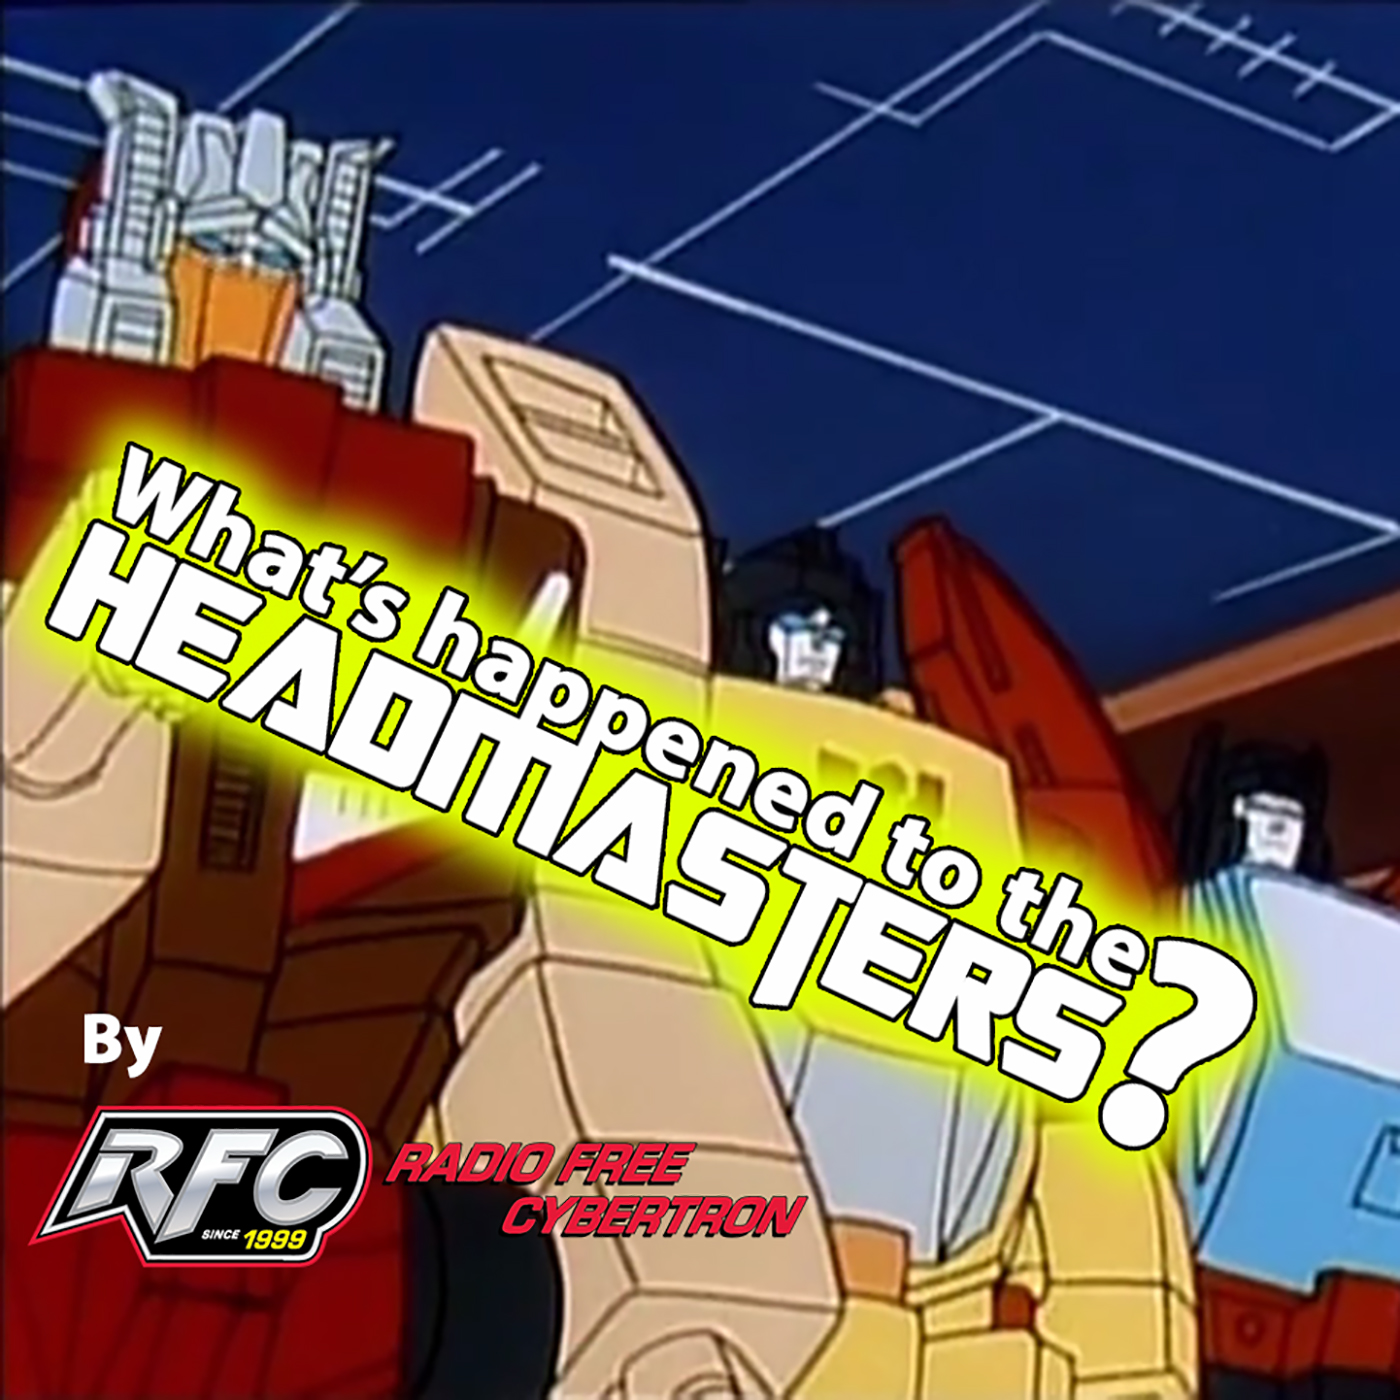 What's Happened to the Headmasters?